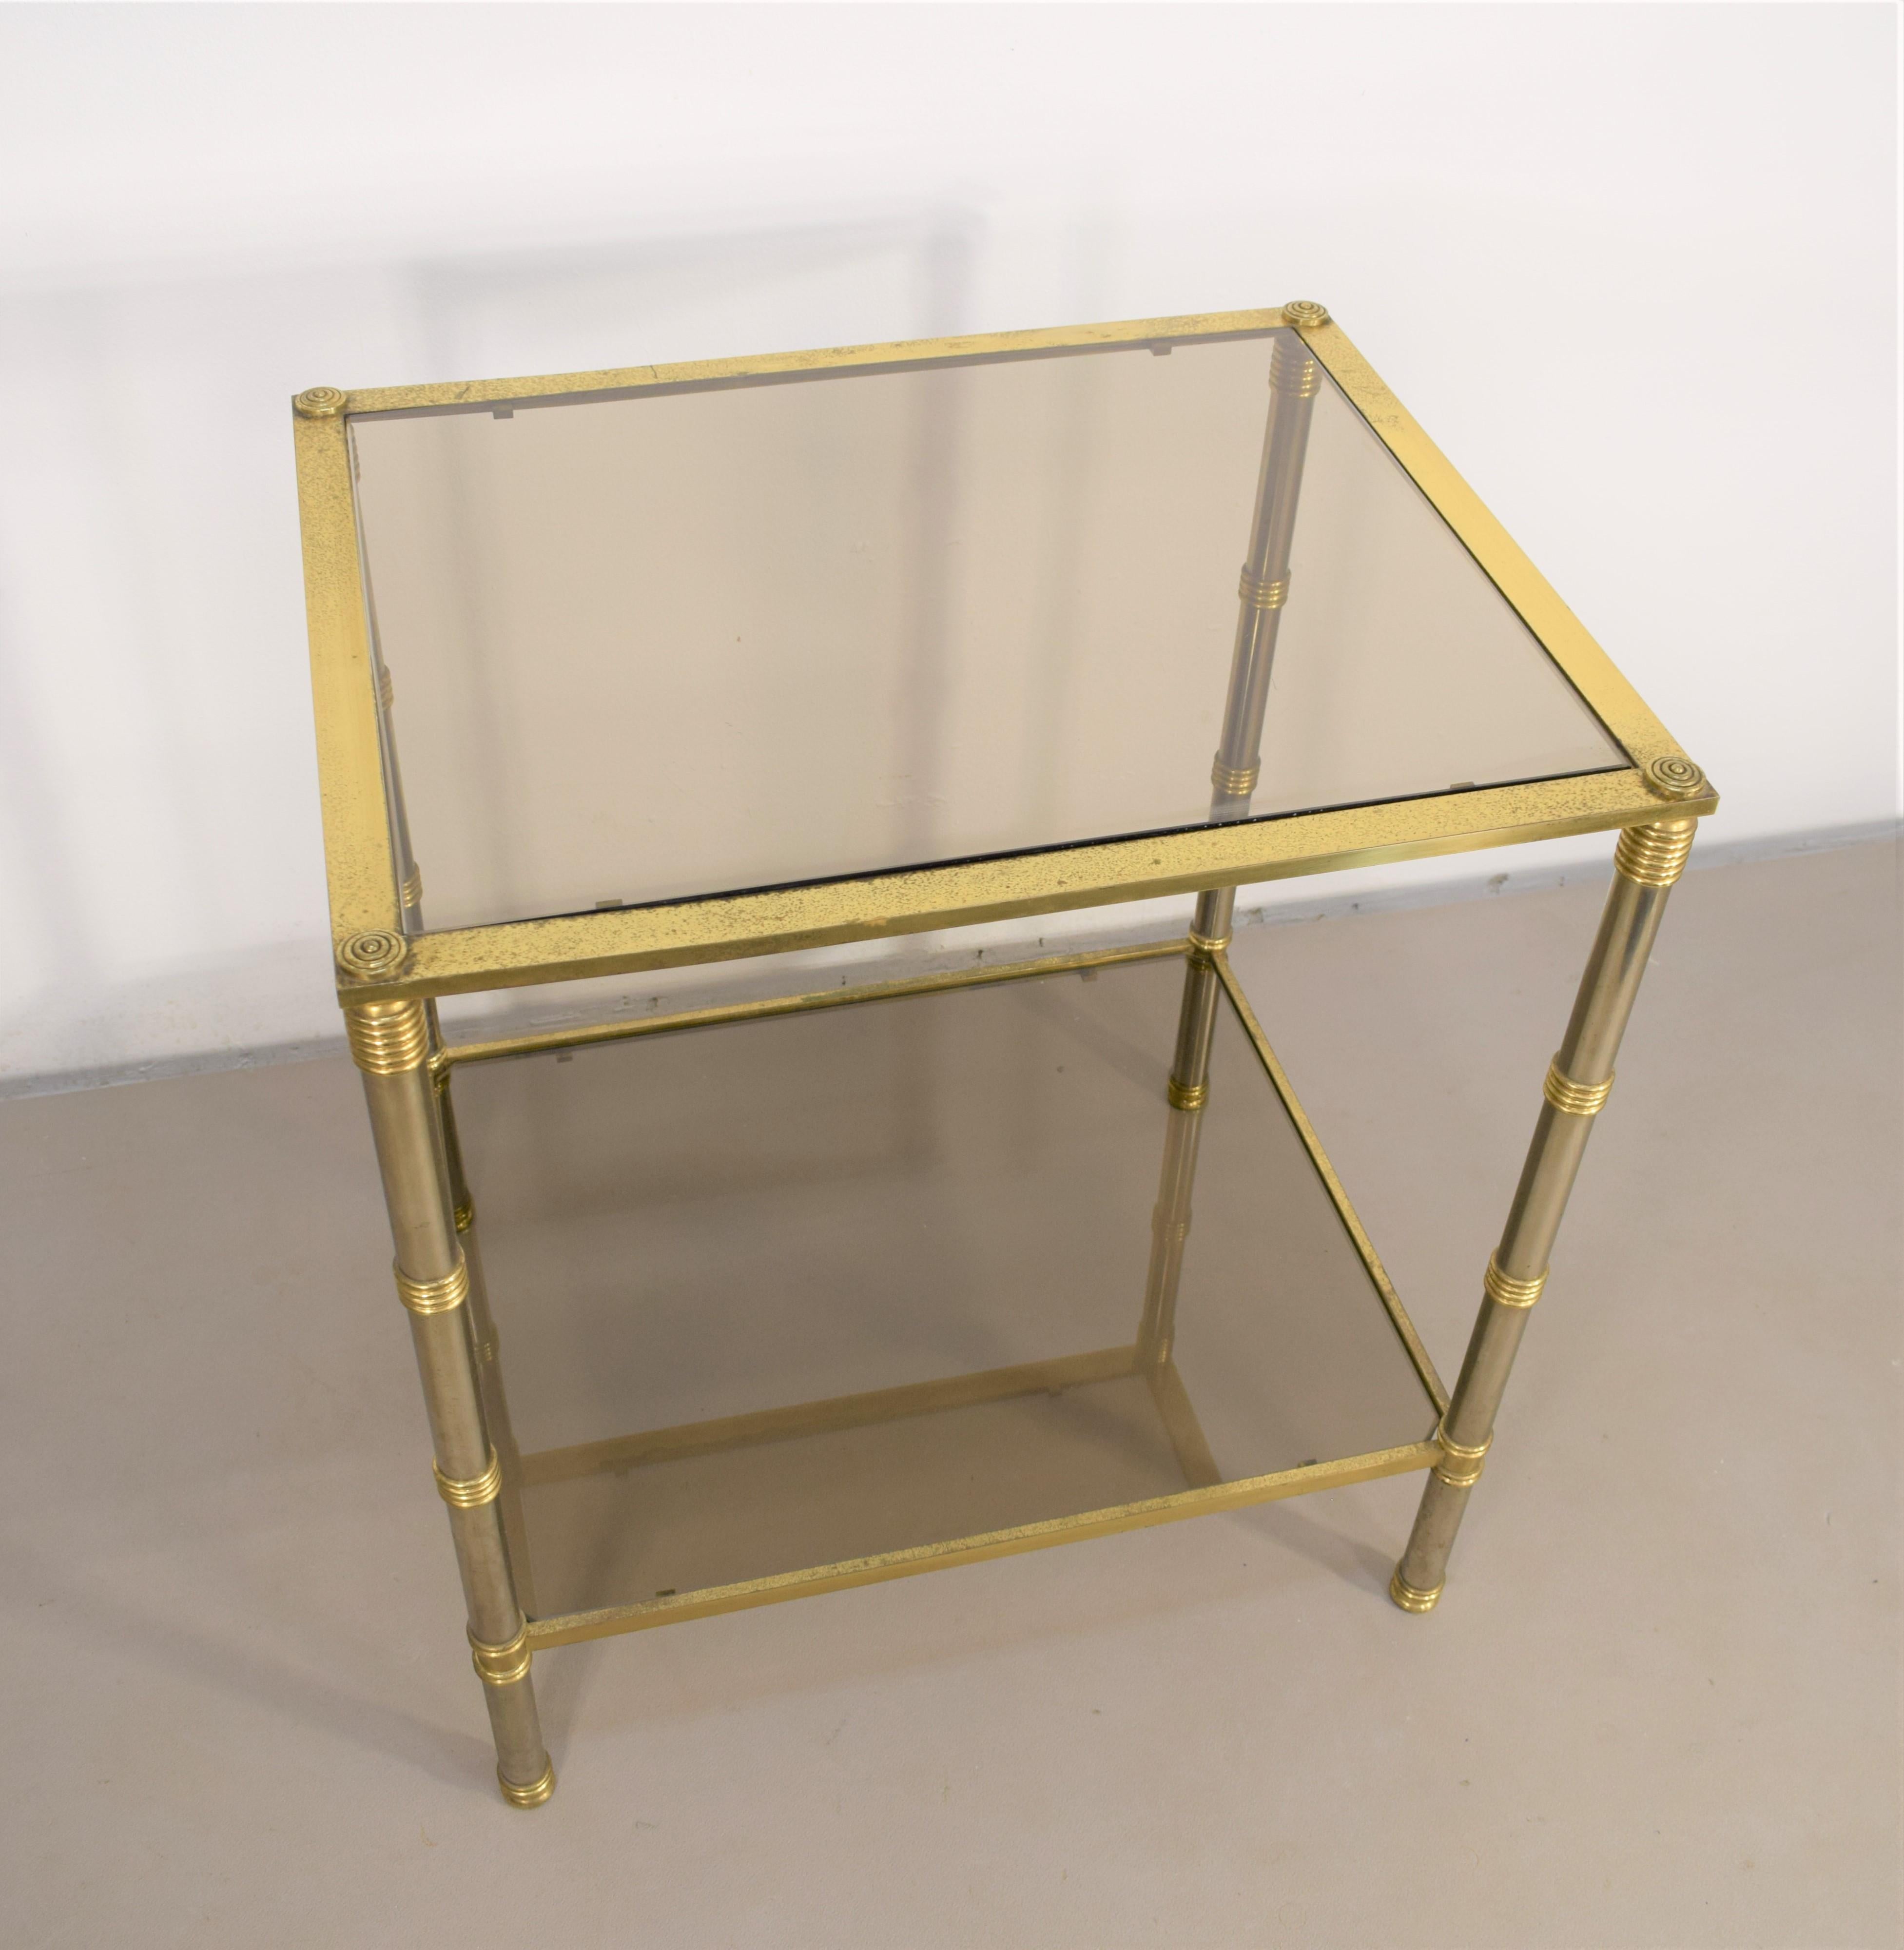 Italian coffee table, brass, steel and smoked glass, 1960s
Dimensionis H= 60 cm; W= 55 cm; D= 45 cm.